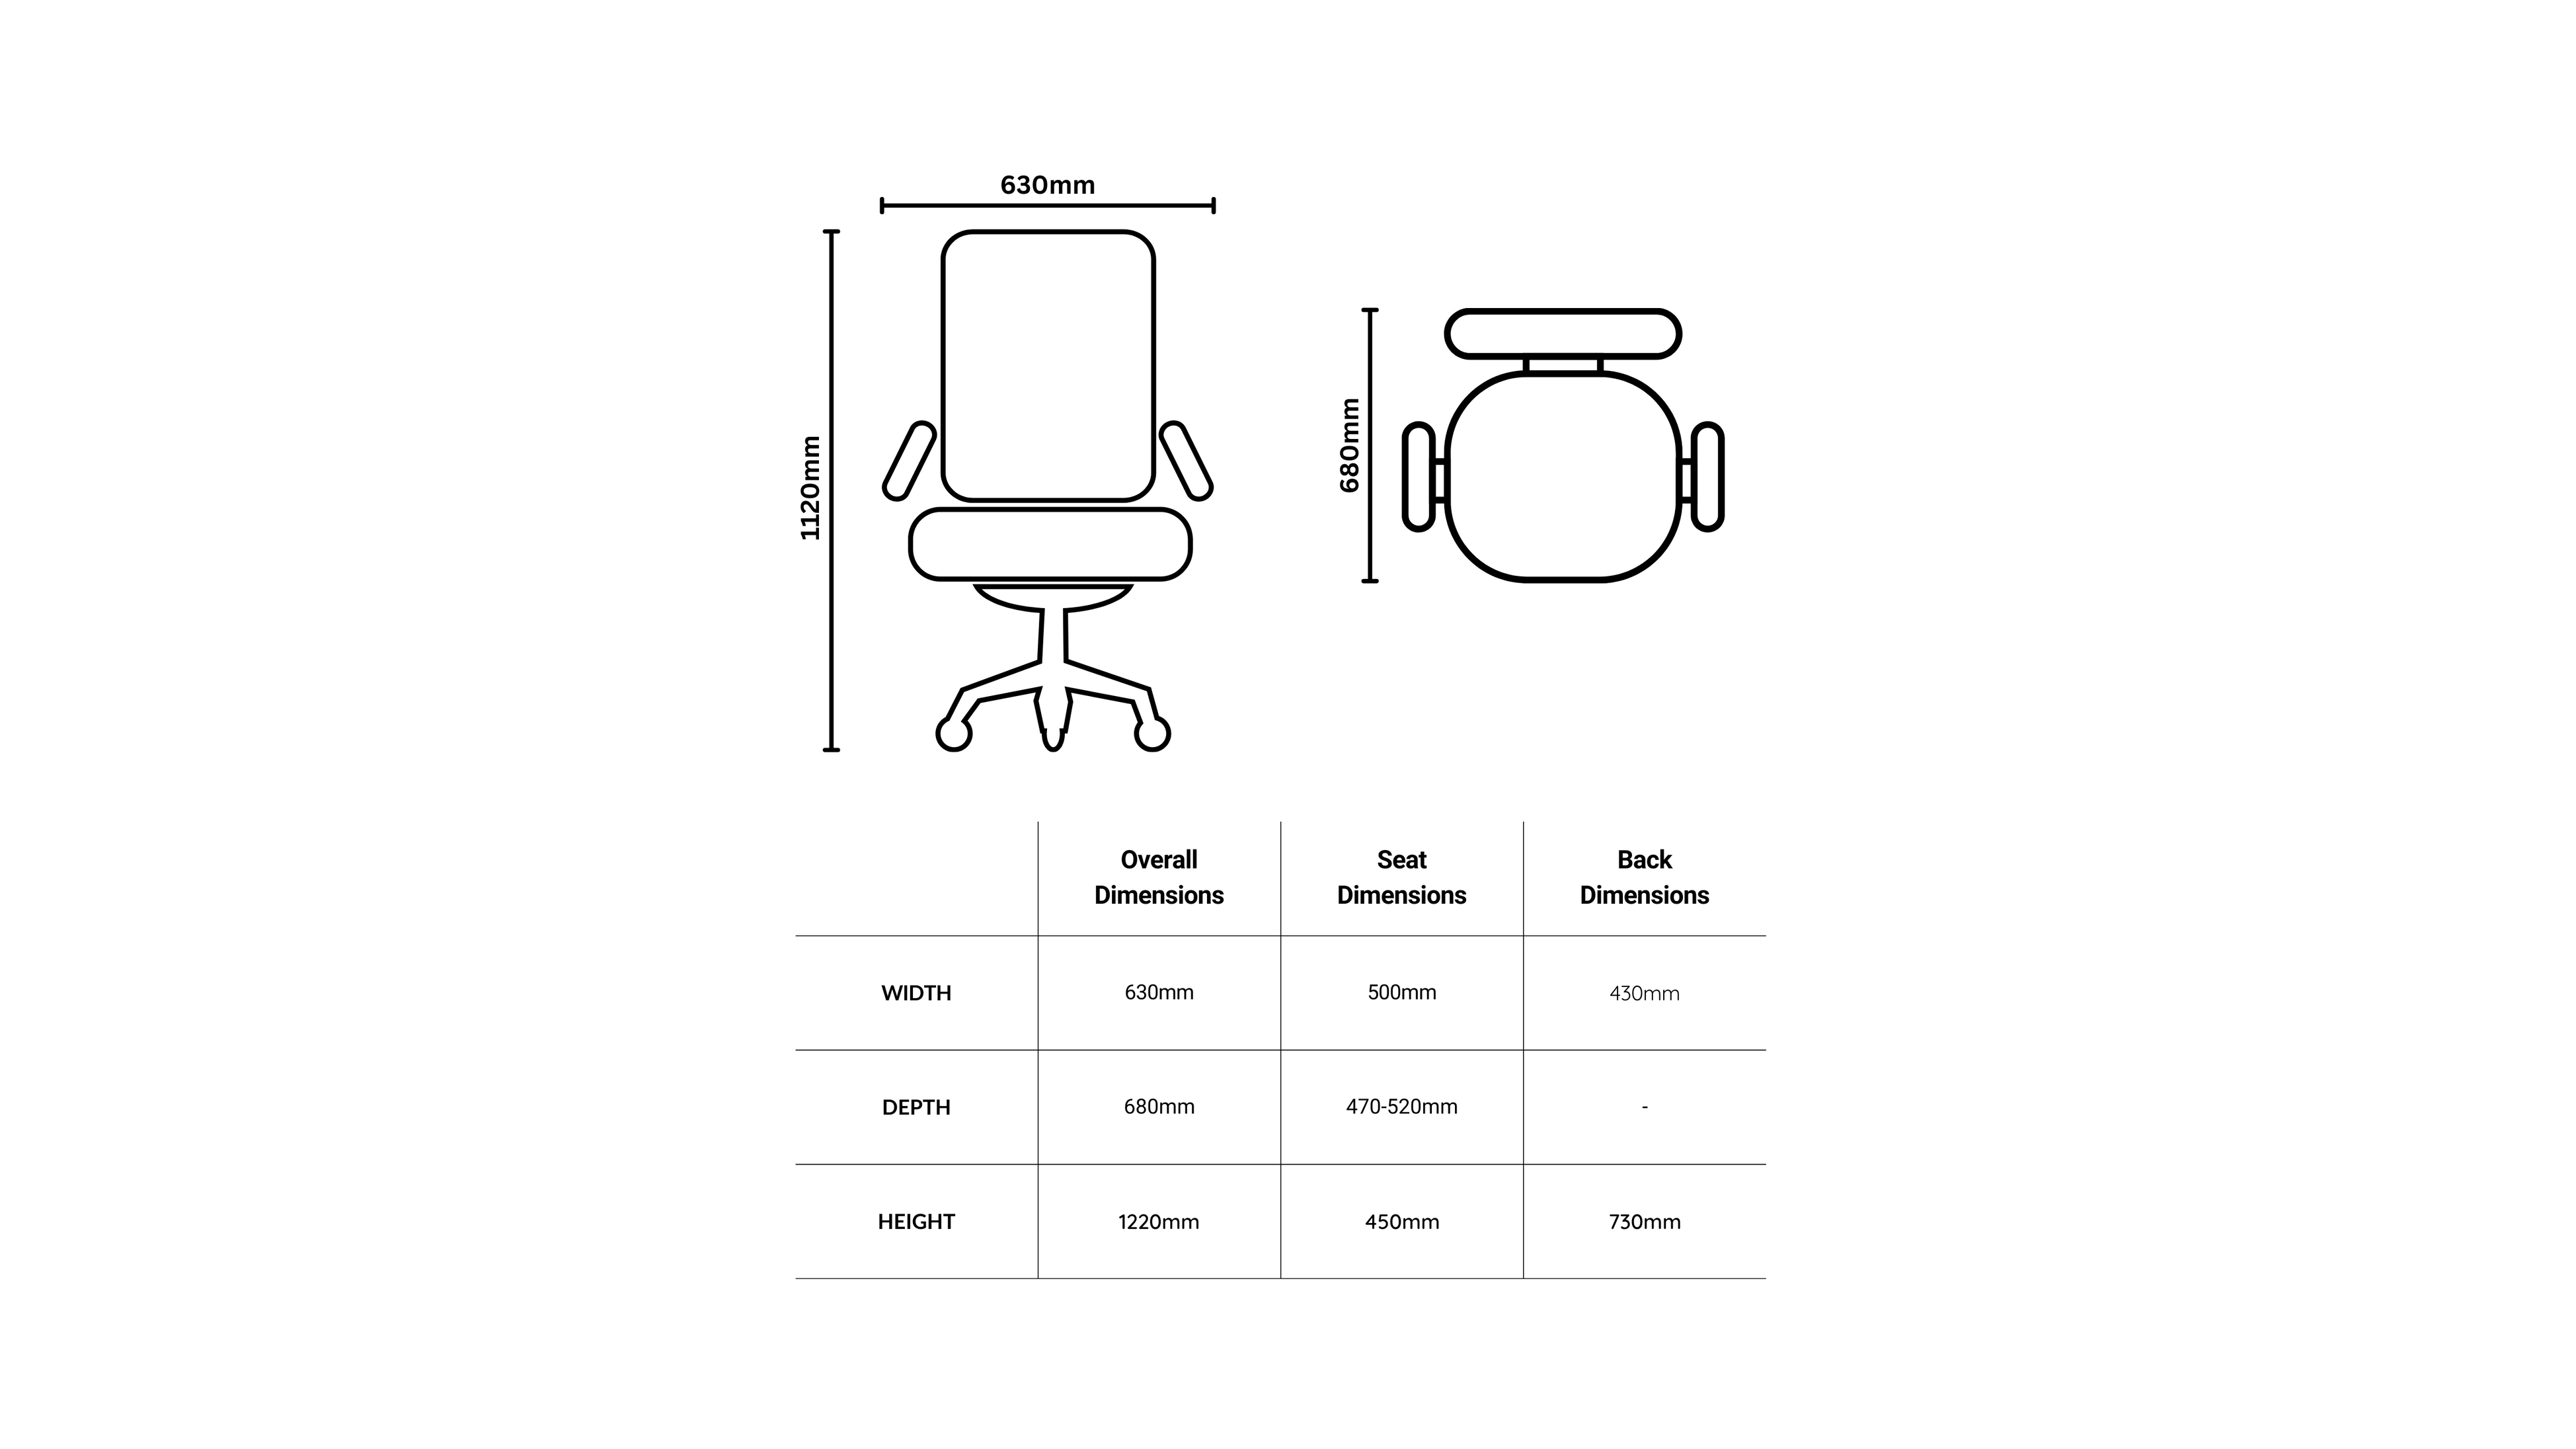 Technical diagram depicting the dimensions of a Lochie office chair. The chair's overall dimensions are indicated as 630mm in width, 680mm in depth, and 1120mm in height. The seat dimensions are shown to be 500mm in width and adjustable in depth from 470mm to 520mm. The back dimensions are given as 430mm in width and 730mm in height.